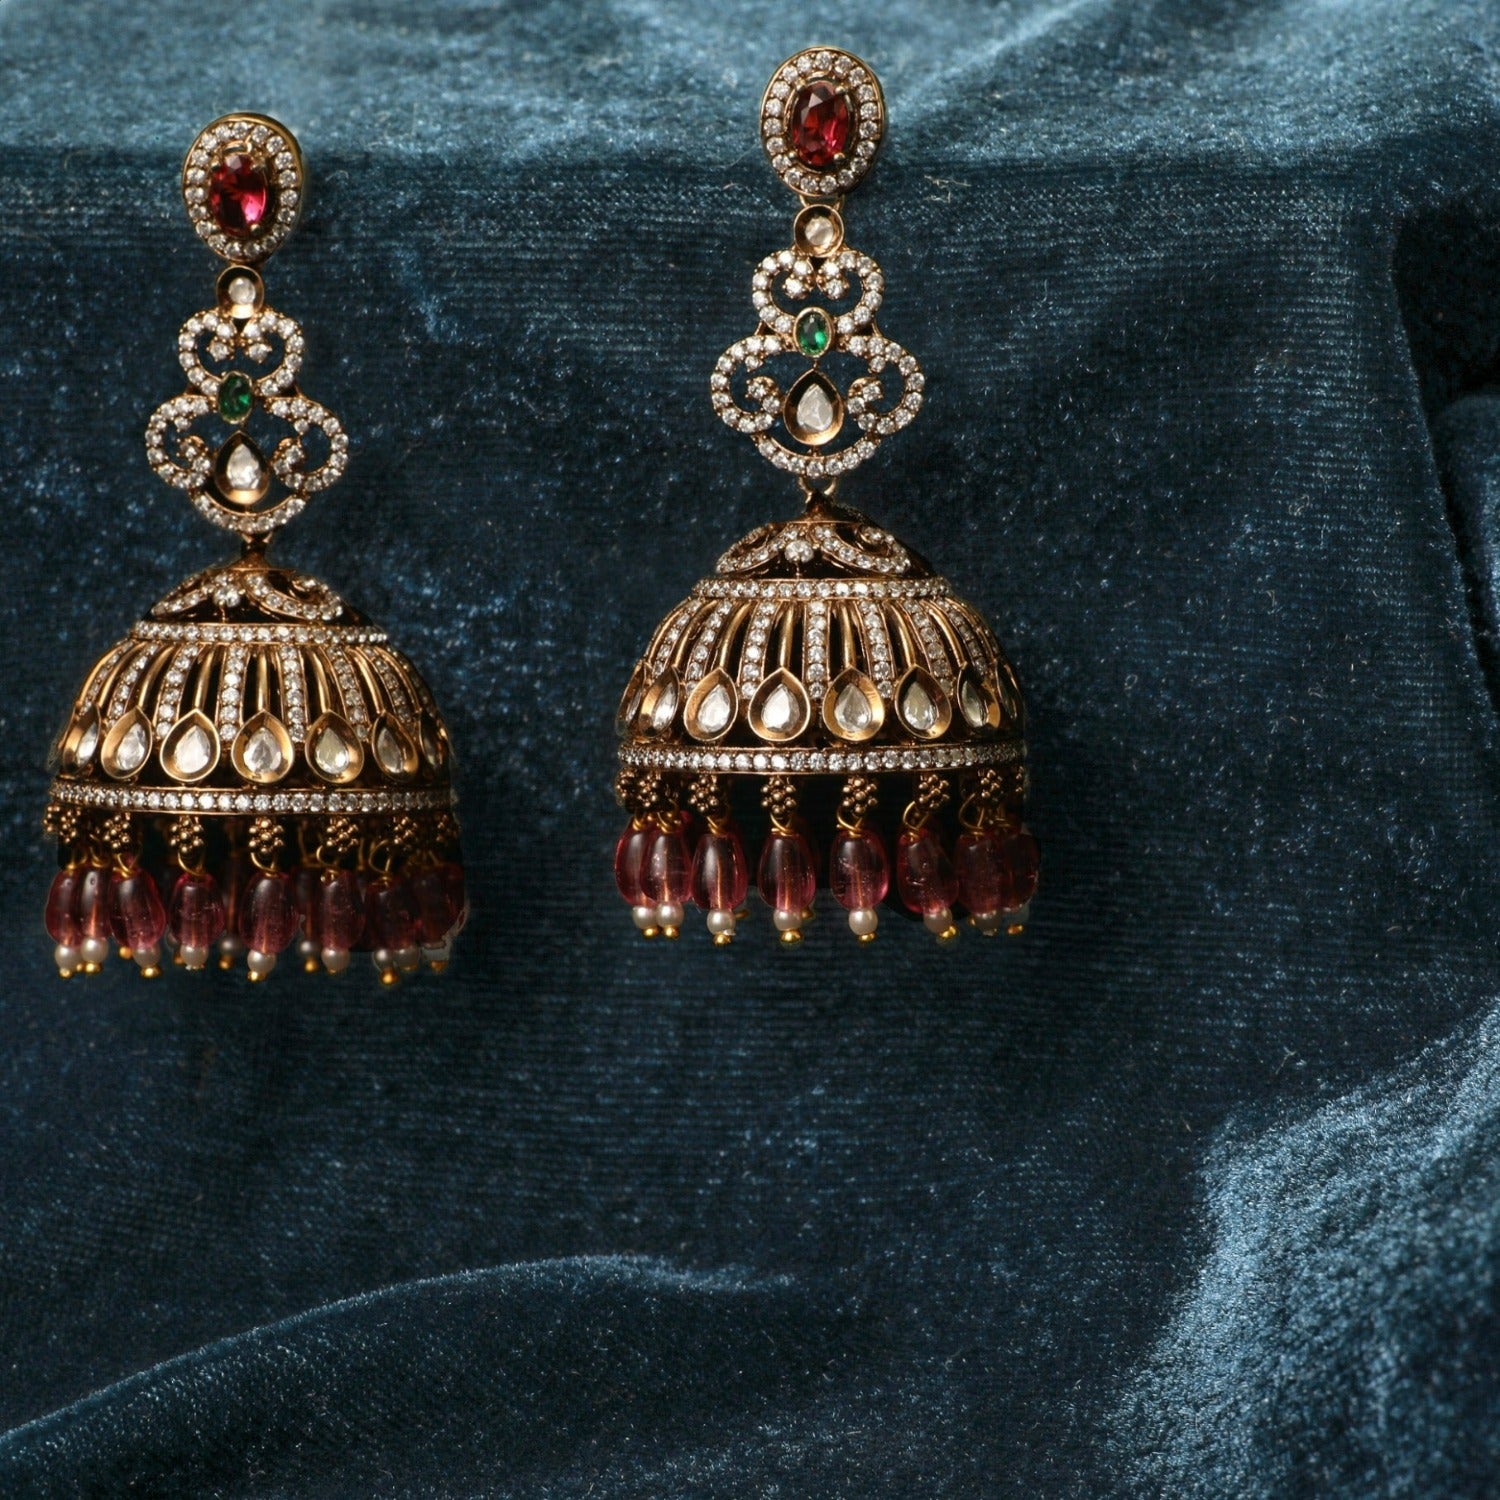 22K Gold Jhumkas (Buttalu) - Gold Dangle Earrings with Cz, Color Stones &  Japanese Culture Pearls - 235-235-GJH2631 in 25.050 Grams